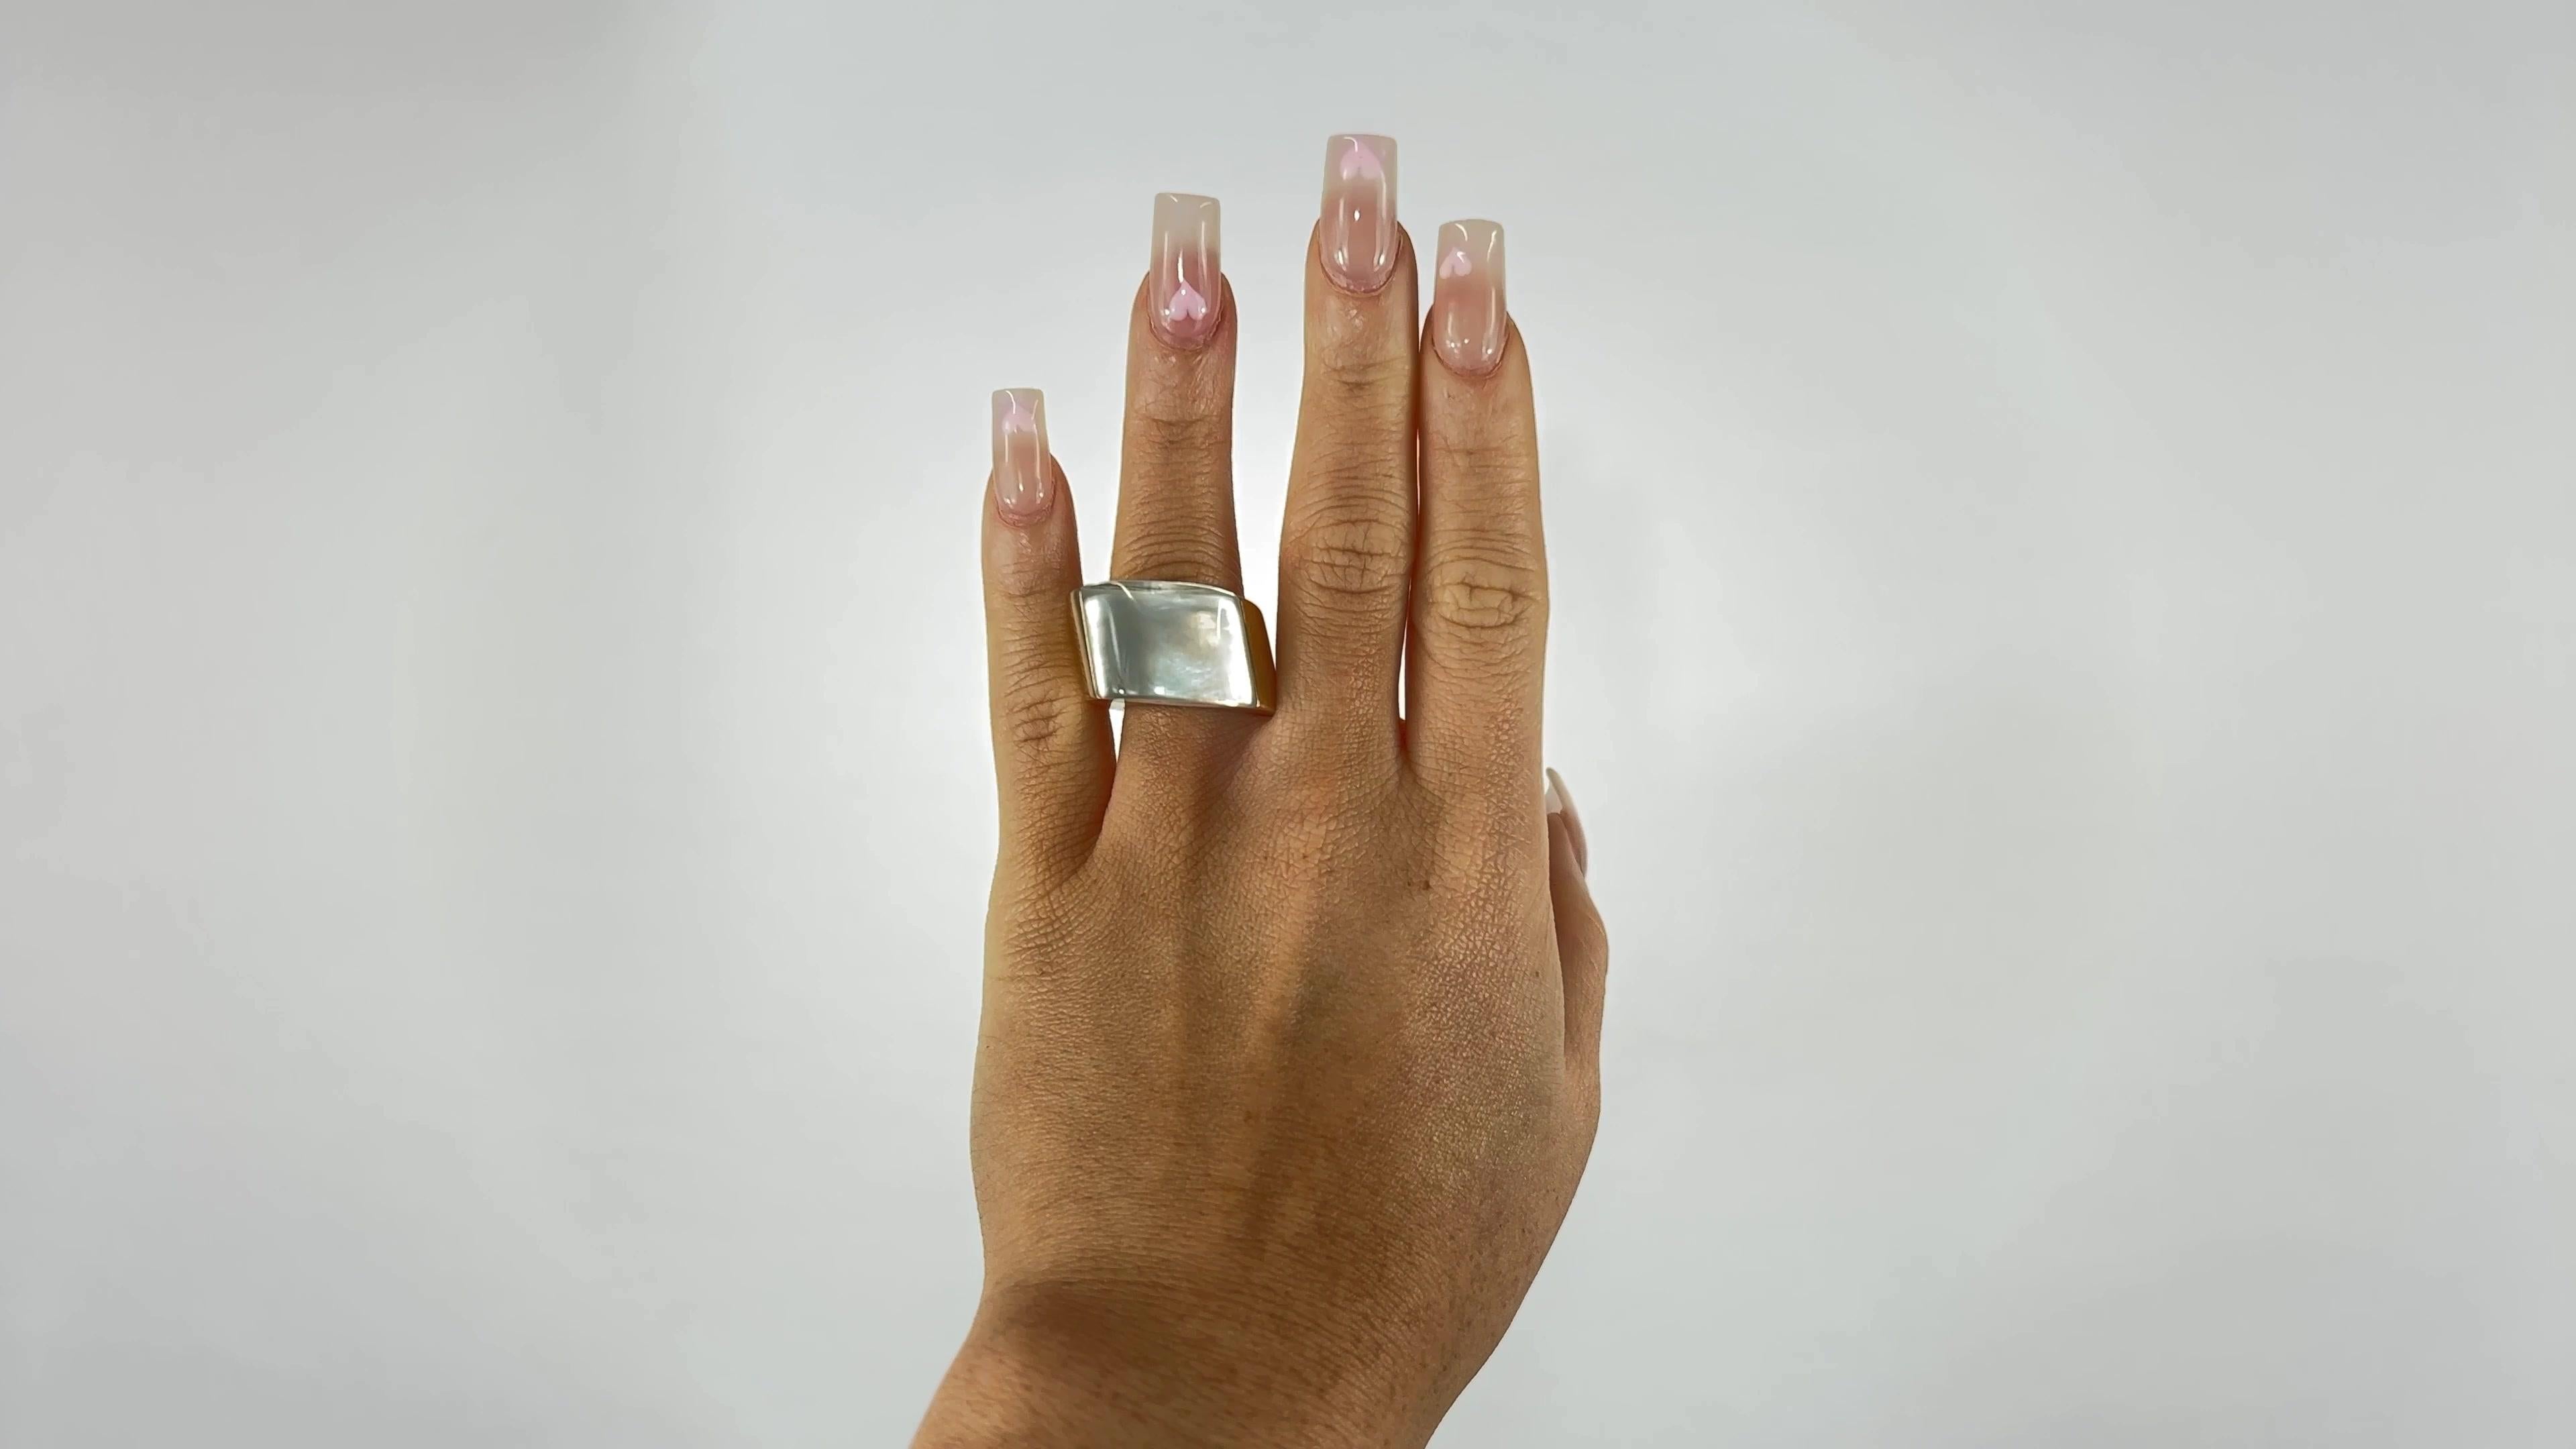 One Vhernier Mother-of-Pearl 18 Karat Gold Cocktail Ring. Featuring mother of pearl and polished rock crystal. Crafted in 18 karat yellow gold, signed Vhernier with Italian hallmarks. Purchased in 2014 for $9,350. Circa 2000s. Ring size 7 and may be